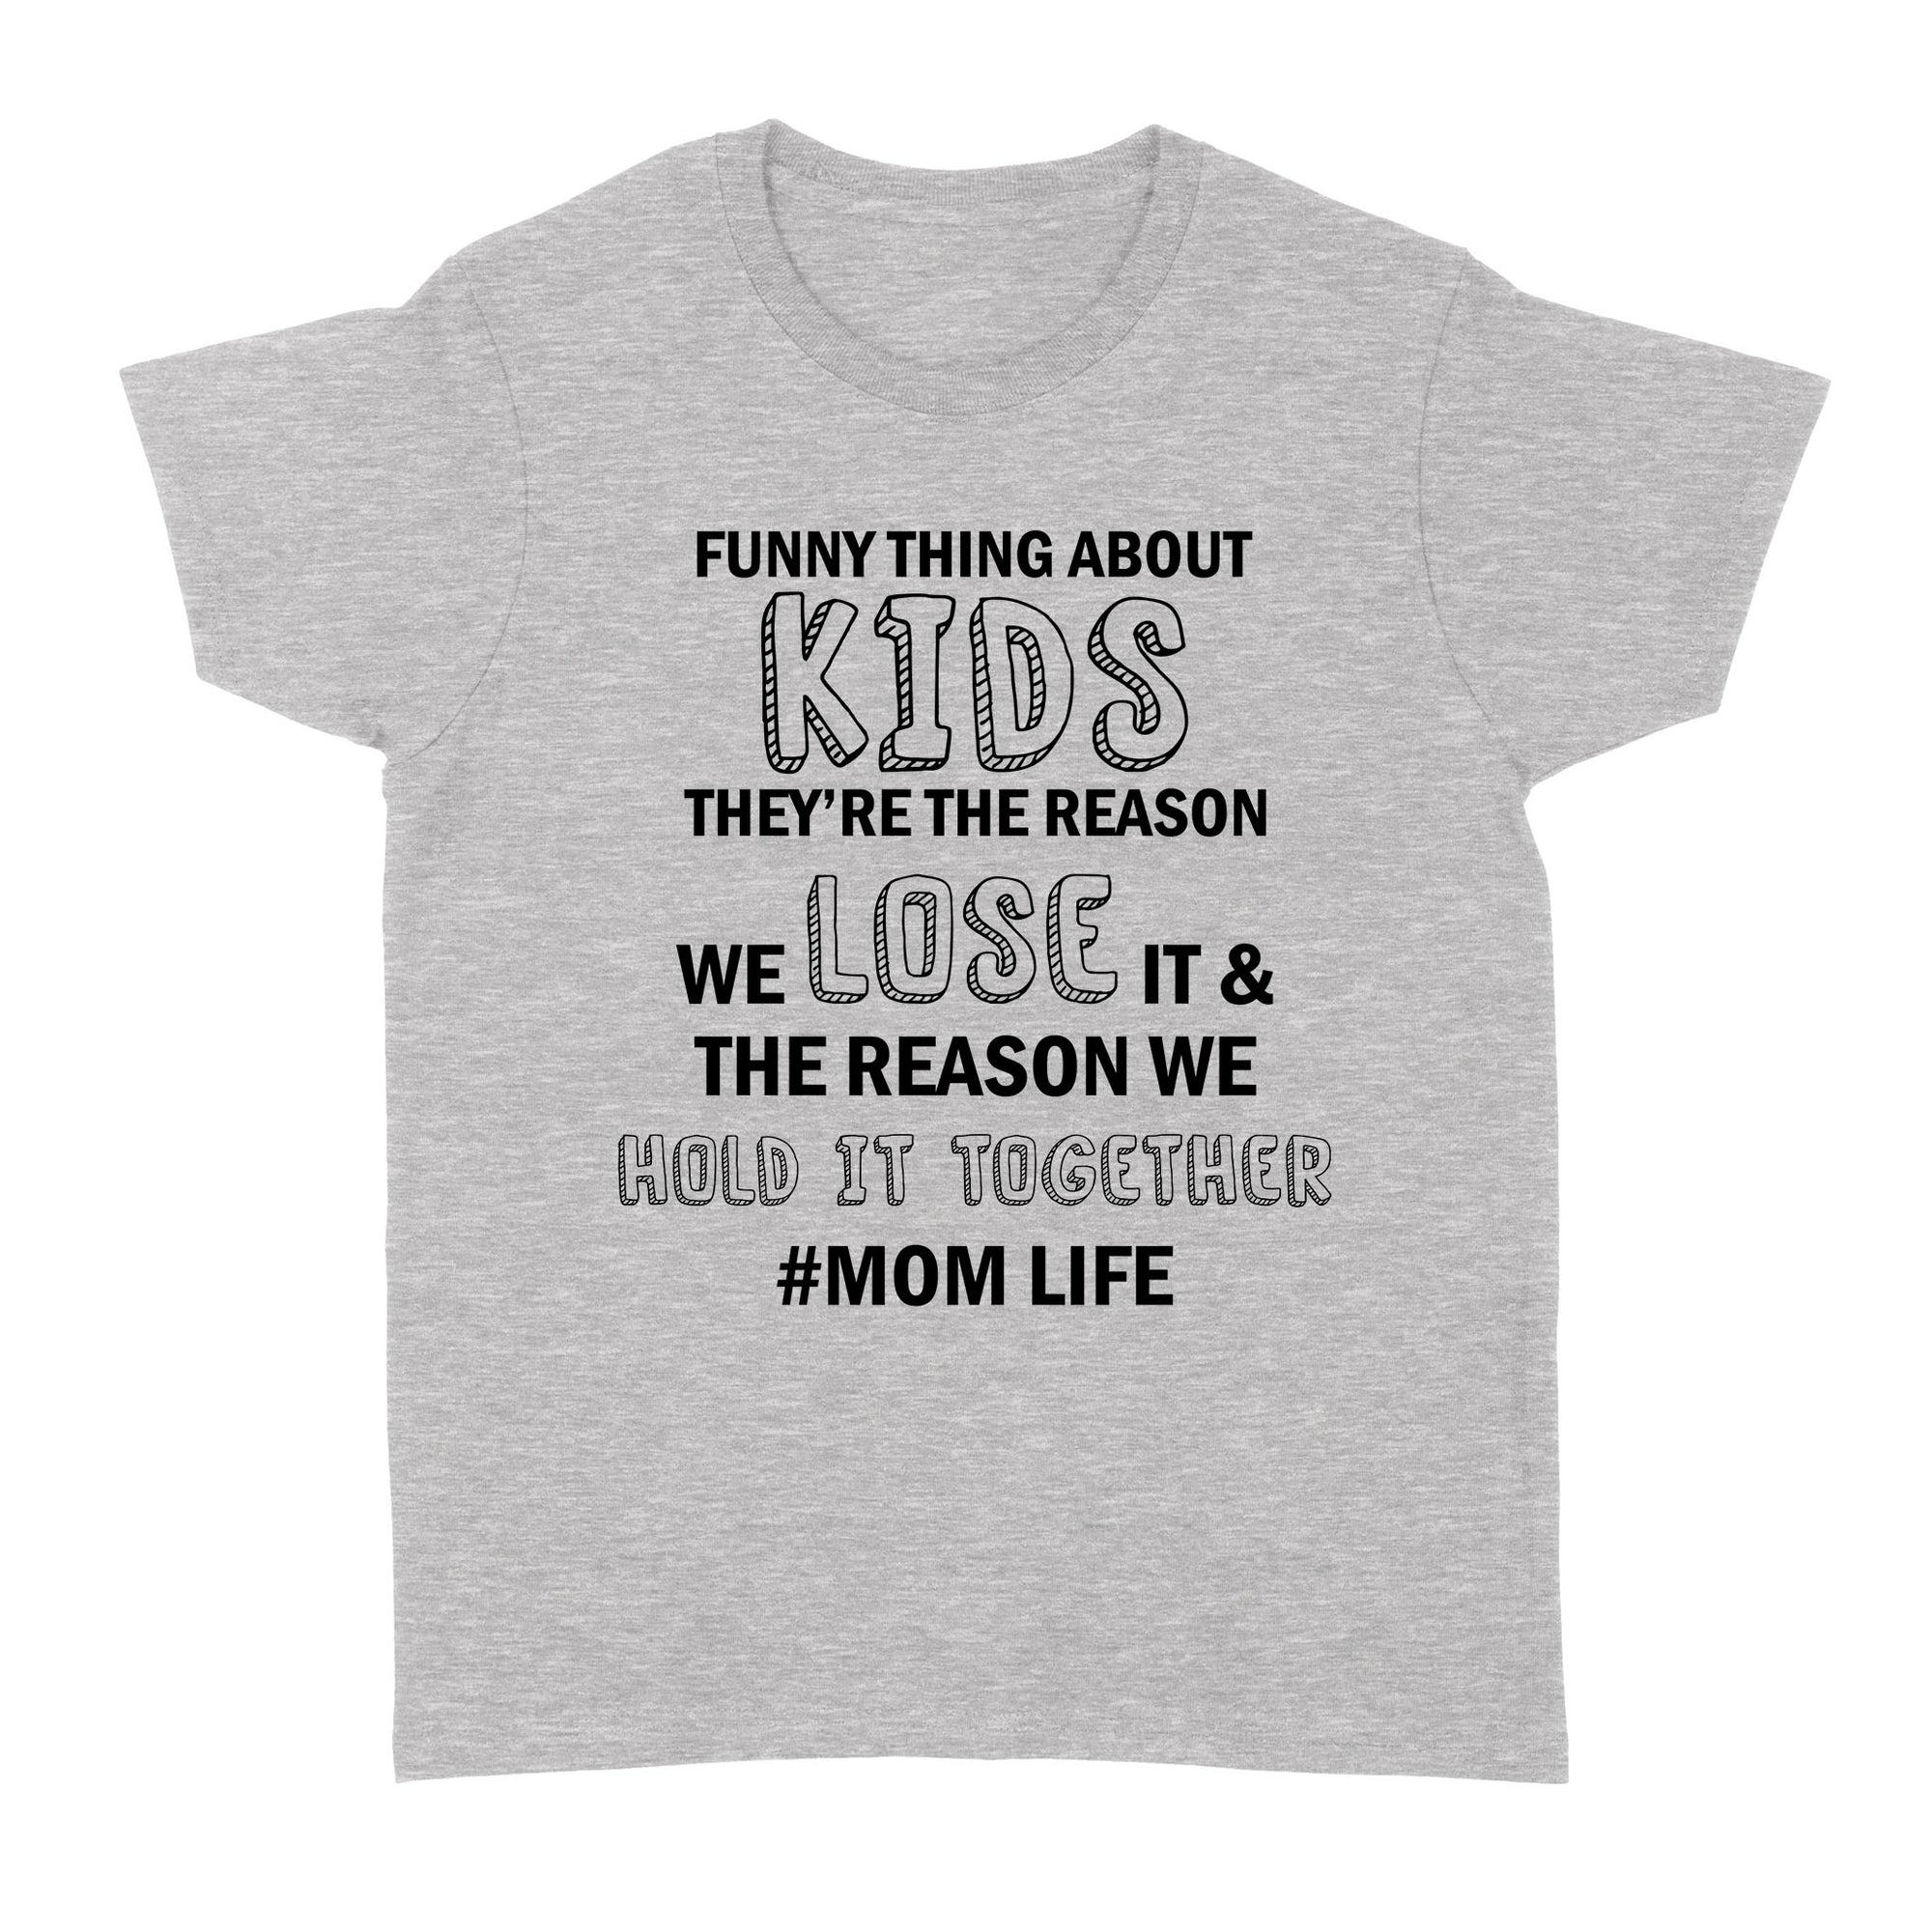 Gift Ideas for Mom Mothers Day Funny Thing About Kids They're The Reason We Lose It The Reason We Hold It Together Momlife - Standard Women's T-shirt